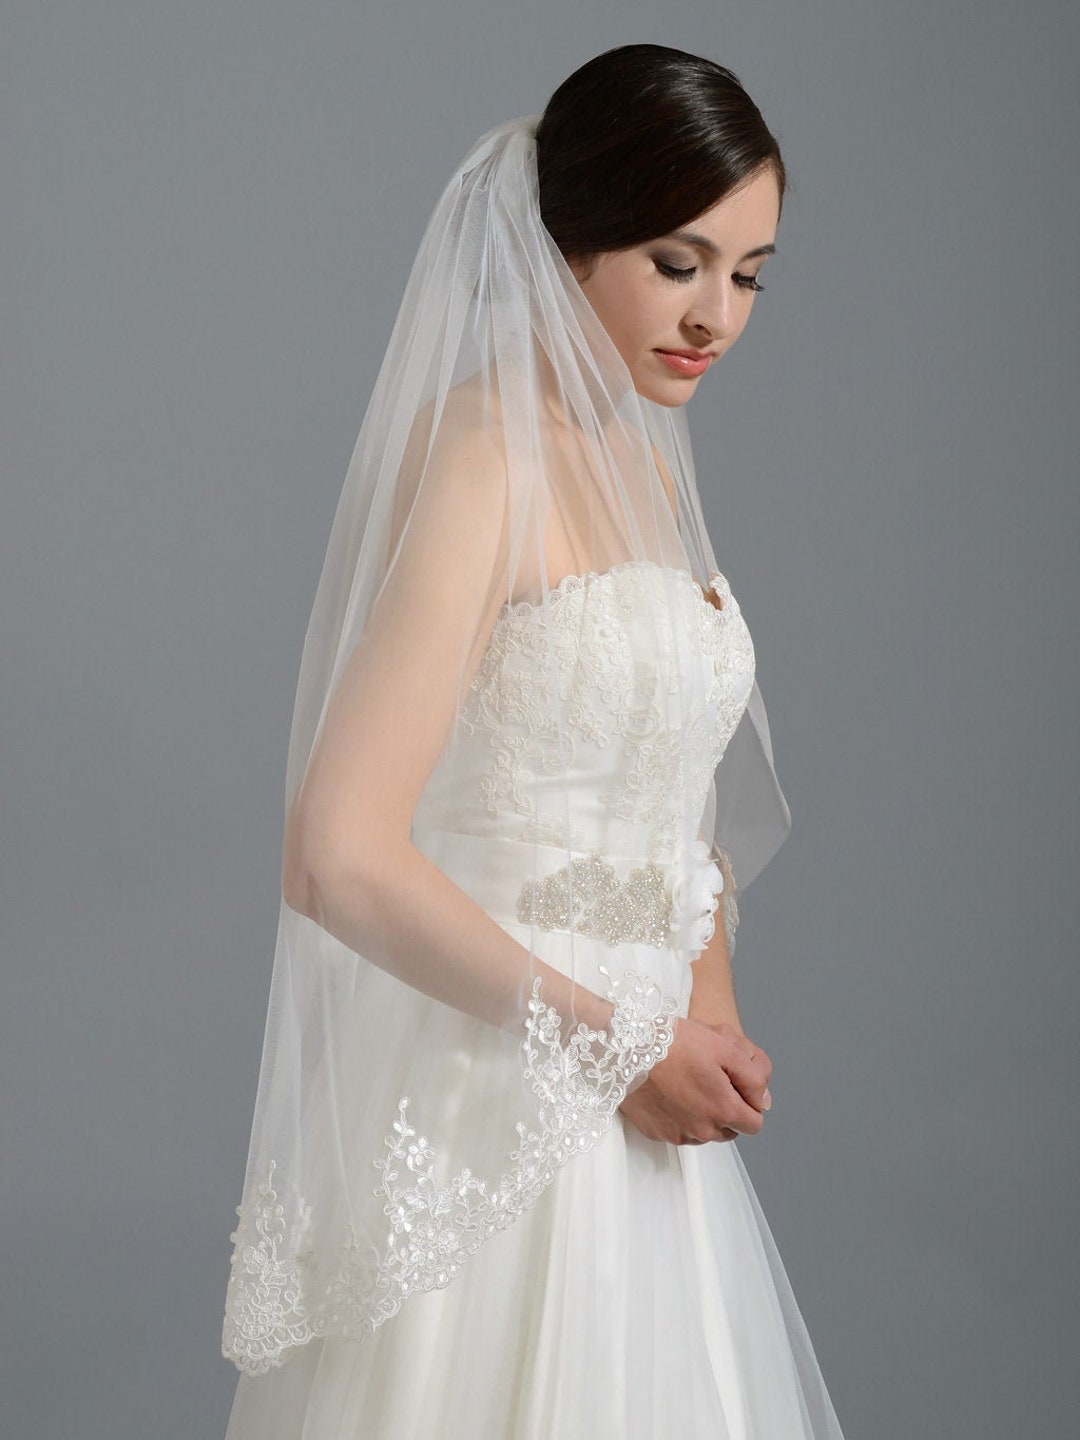 One Blushing Bride Elbow Length Wedding Veil with Beaded Lace Trim, Short Bridal Veil White / Elbow 22-25 inch / No Beading